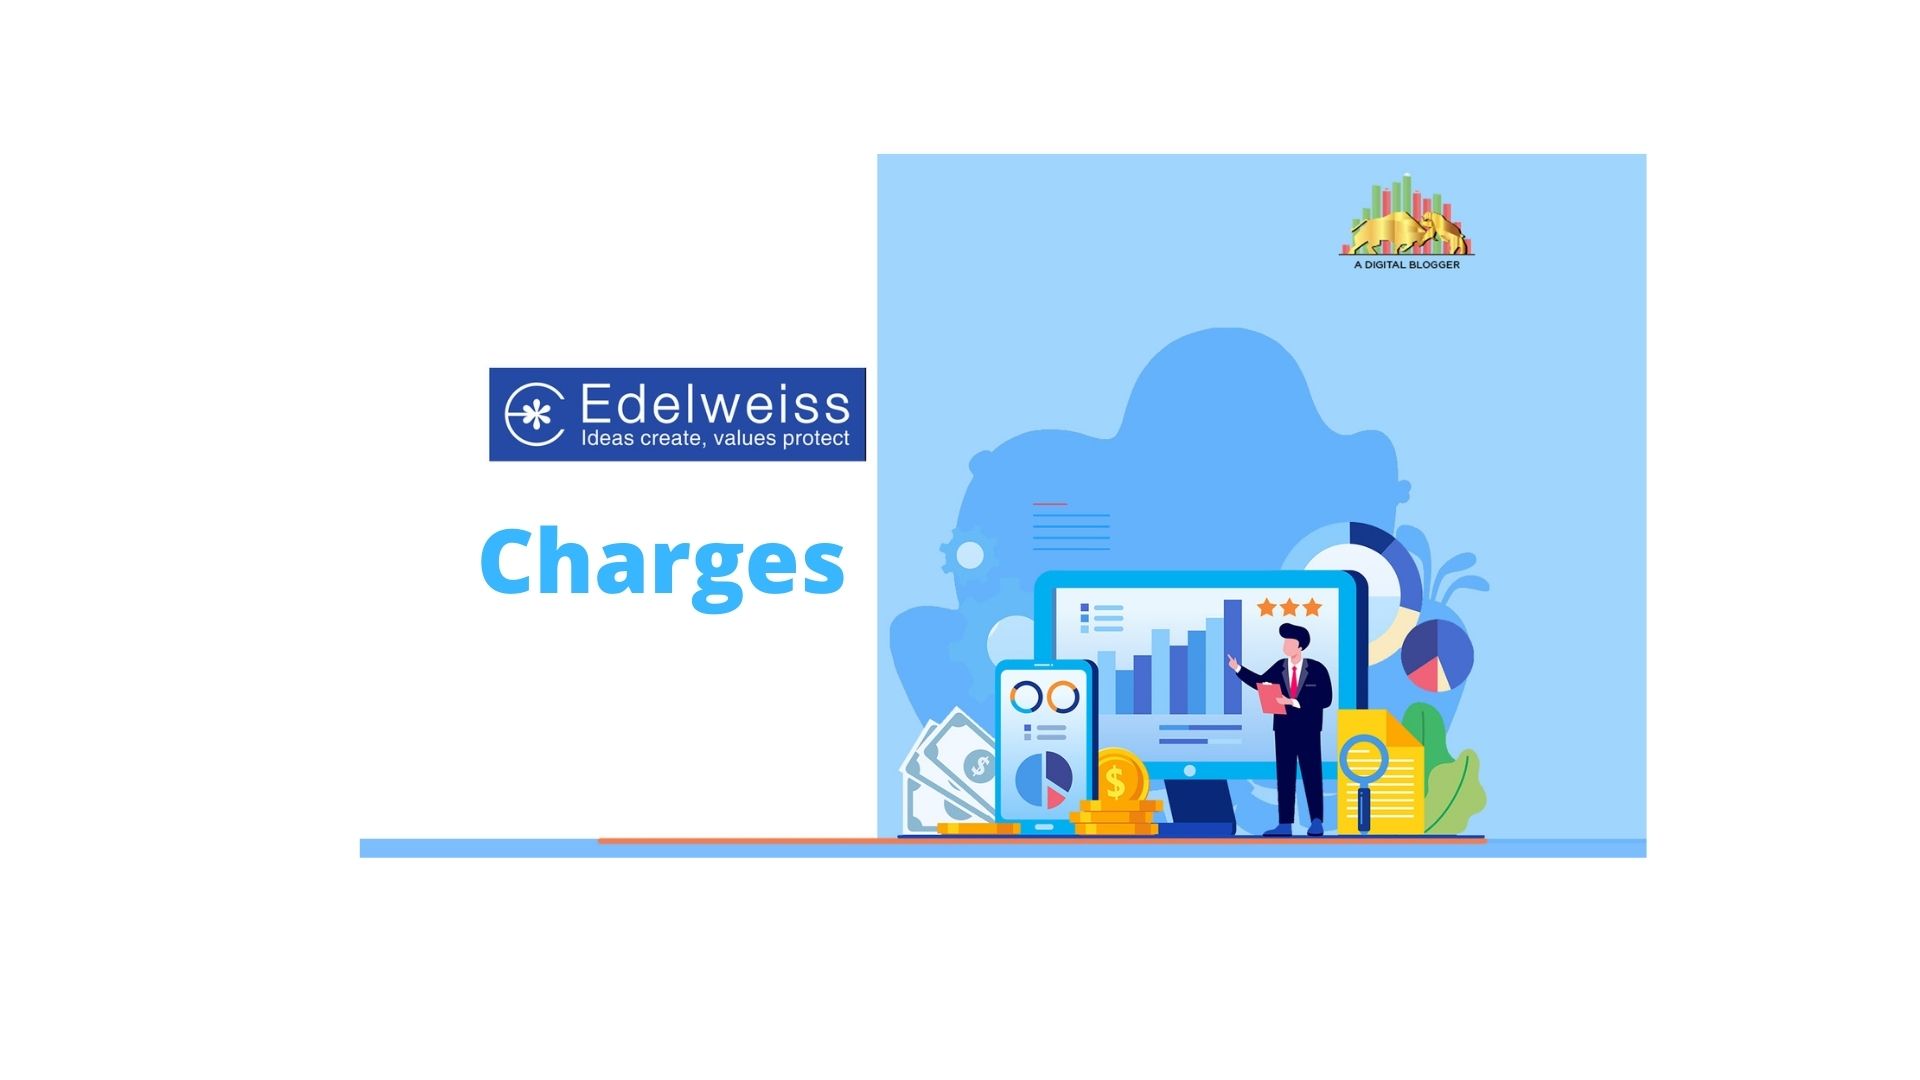 Edelweiss Charges | Trading, AMC, Pledged, Rates